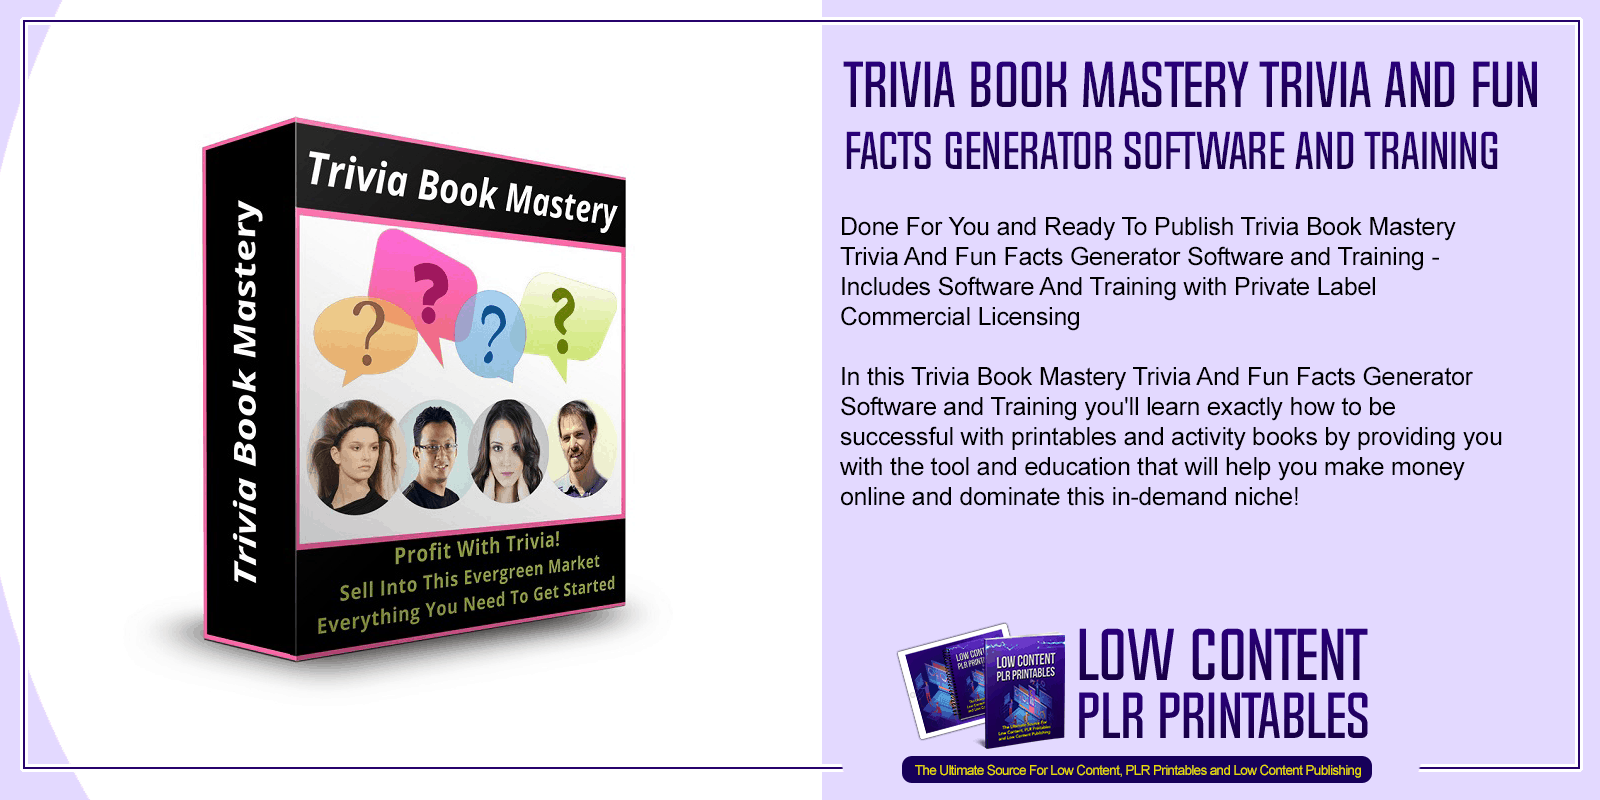 Trivia Book Mastery Trivia And Fun Facts Generator Software and Training